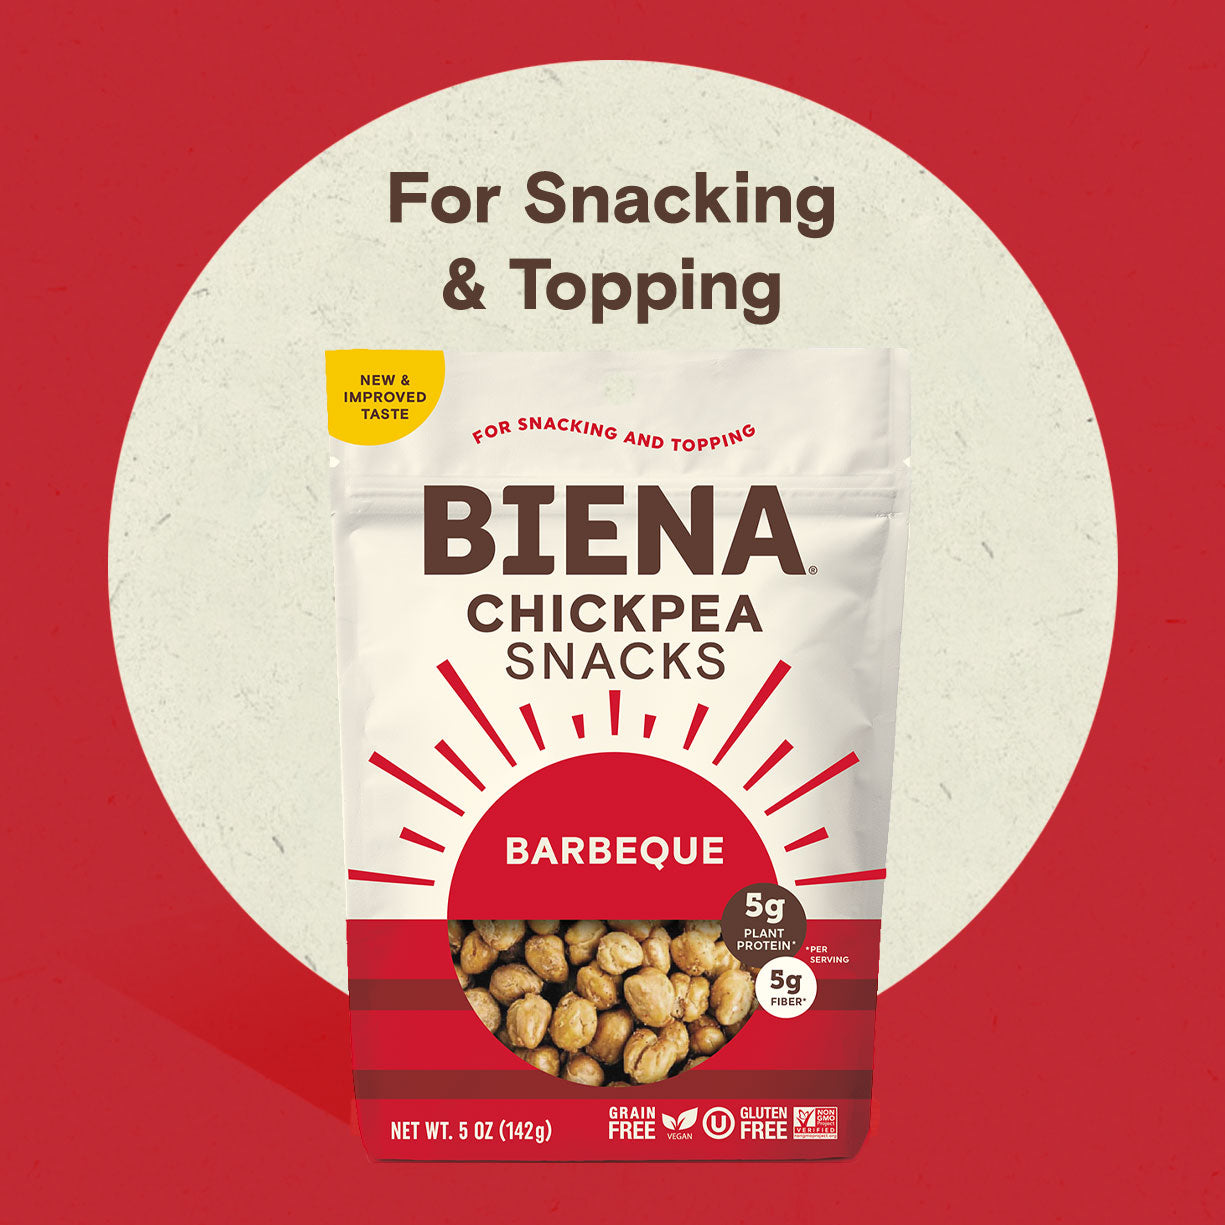 Biena Barbecue Chickpea Snacks are for snacking and topping